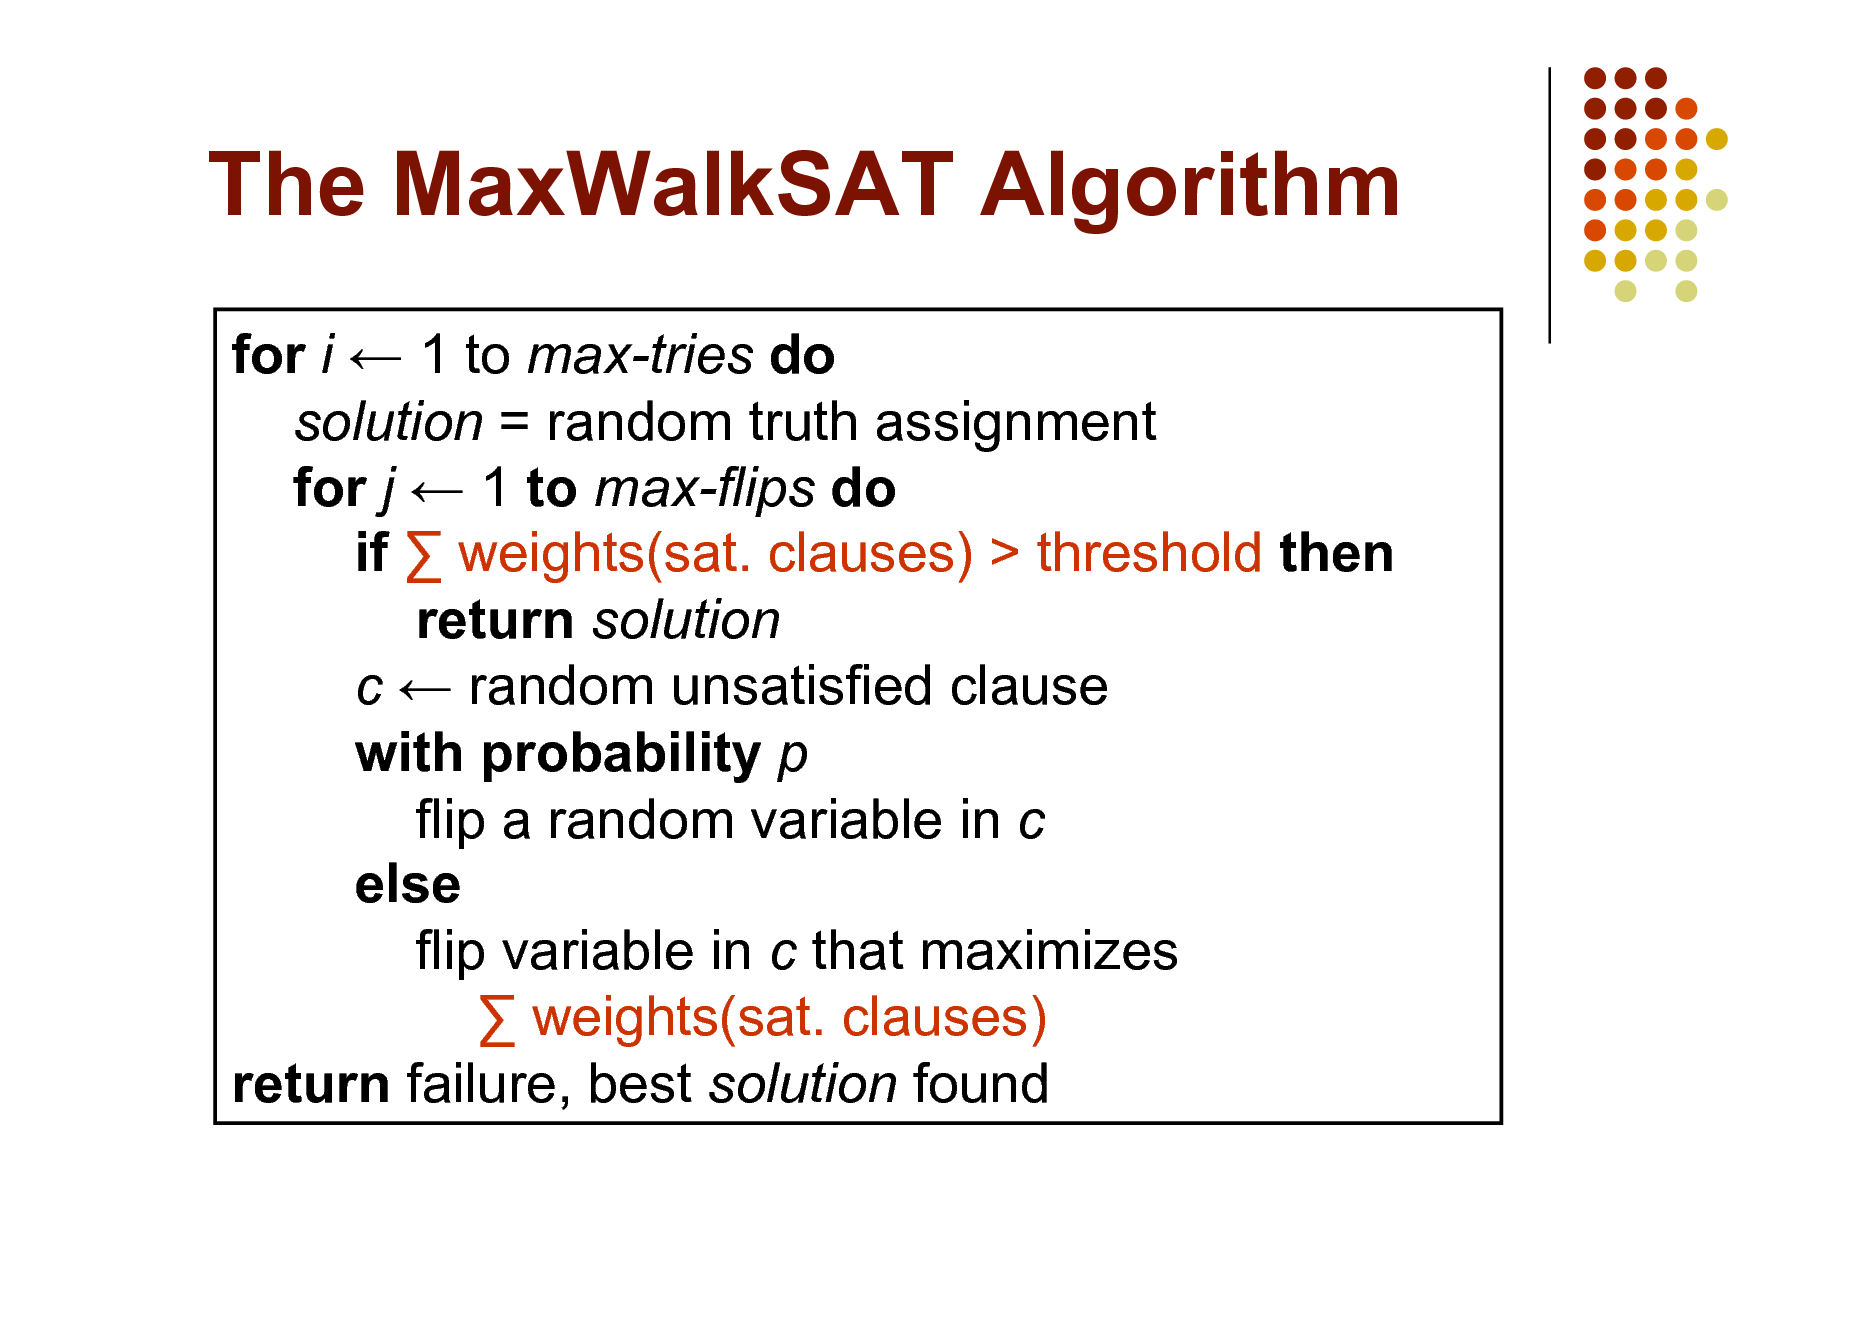 Slide: The MaxWalkSAT Algorithm
for i  1 to max-tries do solution = random truth assignment for j  1 to max-flips do if  weights(sat. clauses) > threshold then return solution c  random unsatisfied clause with probability p flip a random variable in c else flip variable in c that maximizes  weights(sat. clauses) return failure, best solution found

